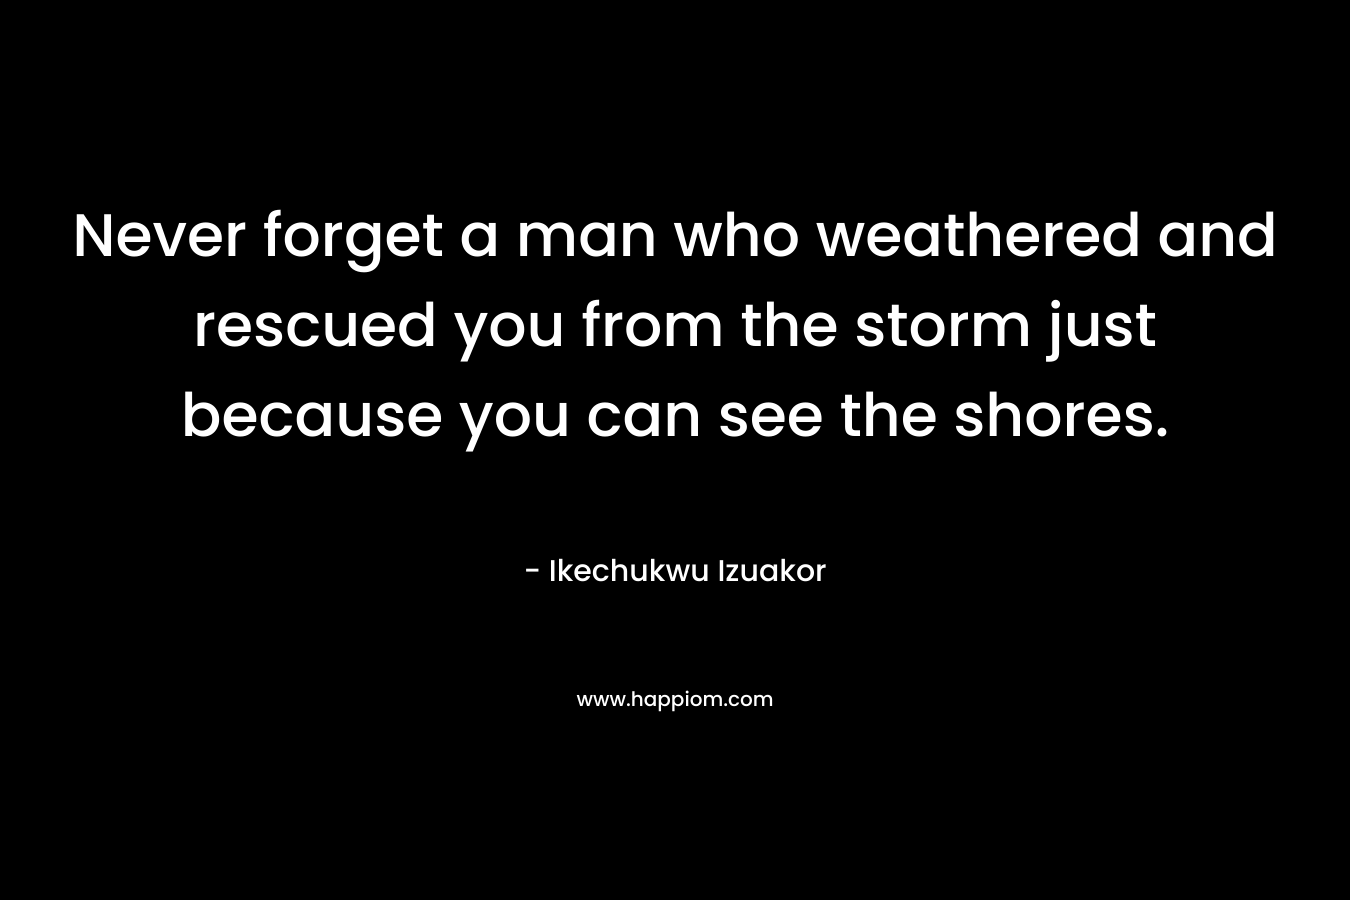 Never forget a man who weathered and rescued you from the storm just because you can see the shores. – Ikechukwu Izuakor